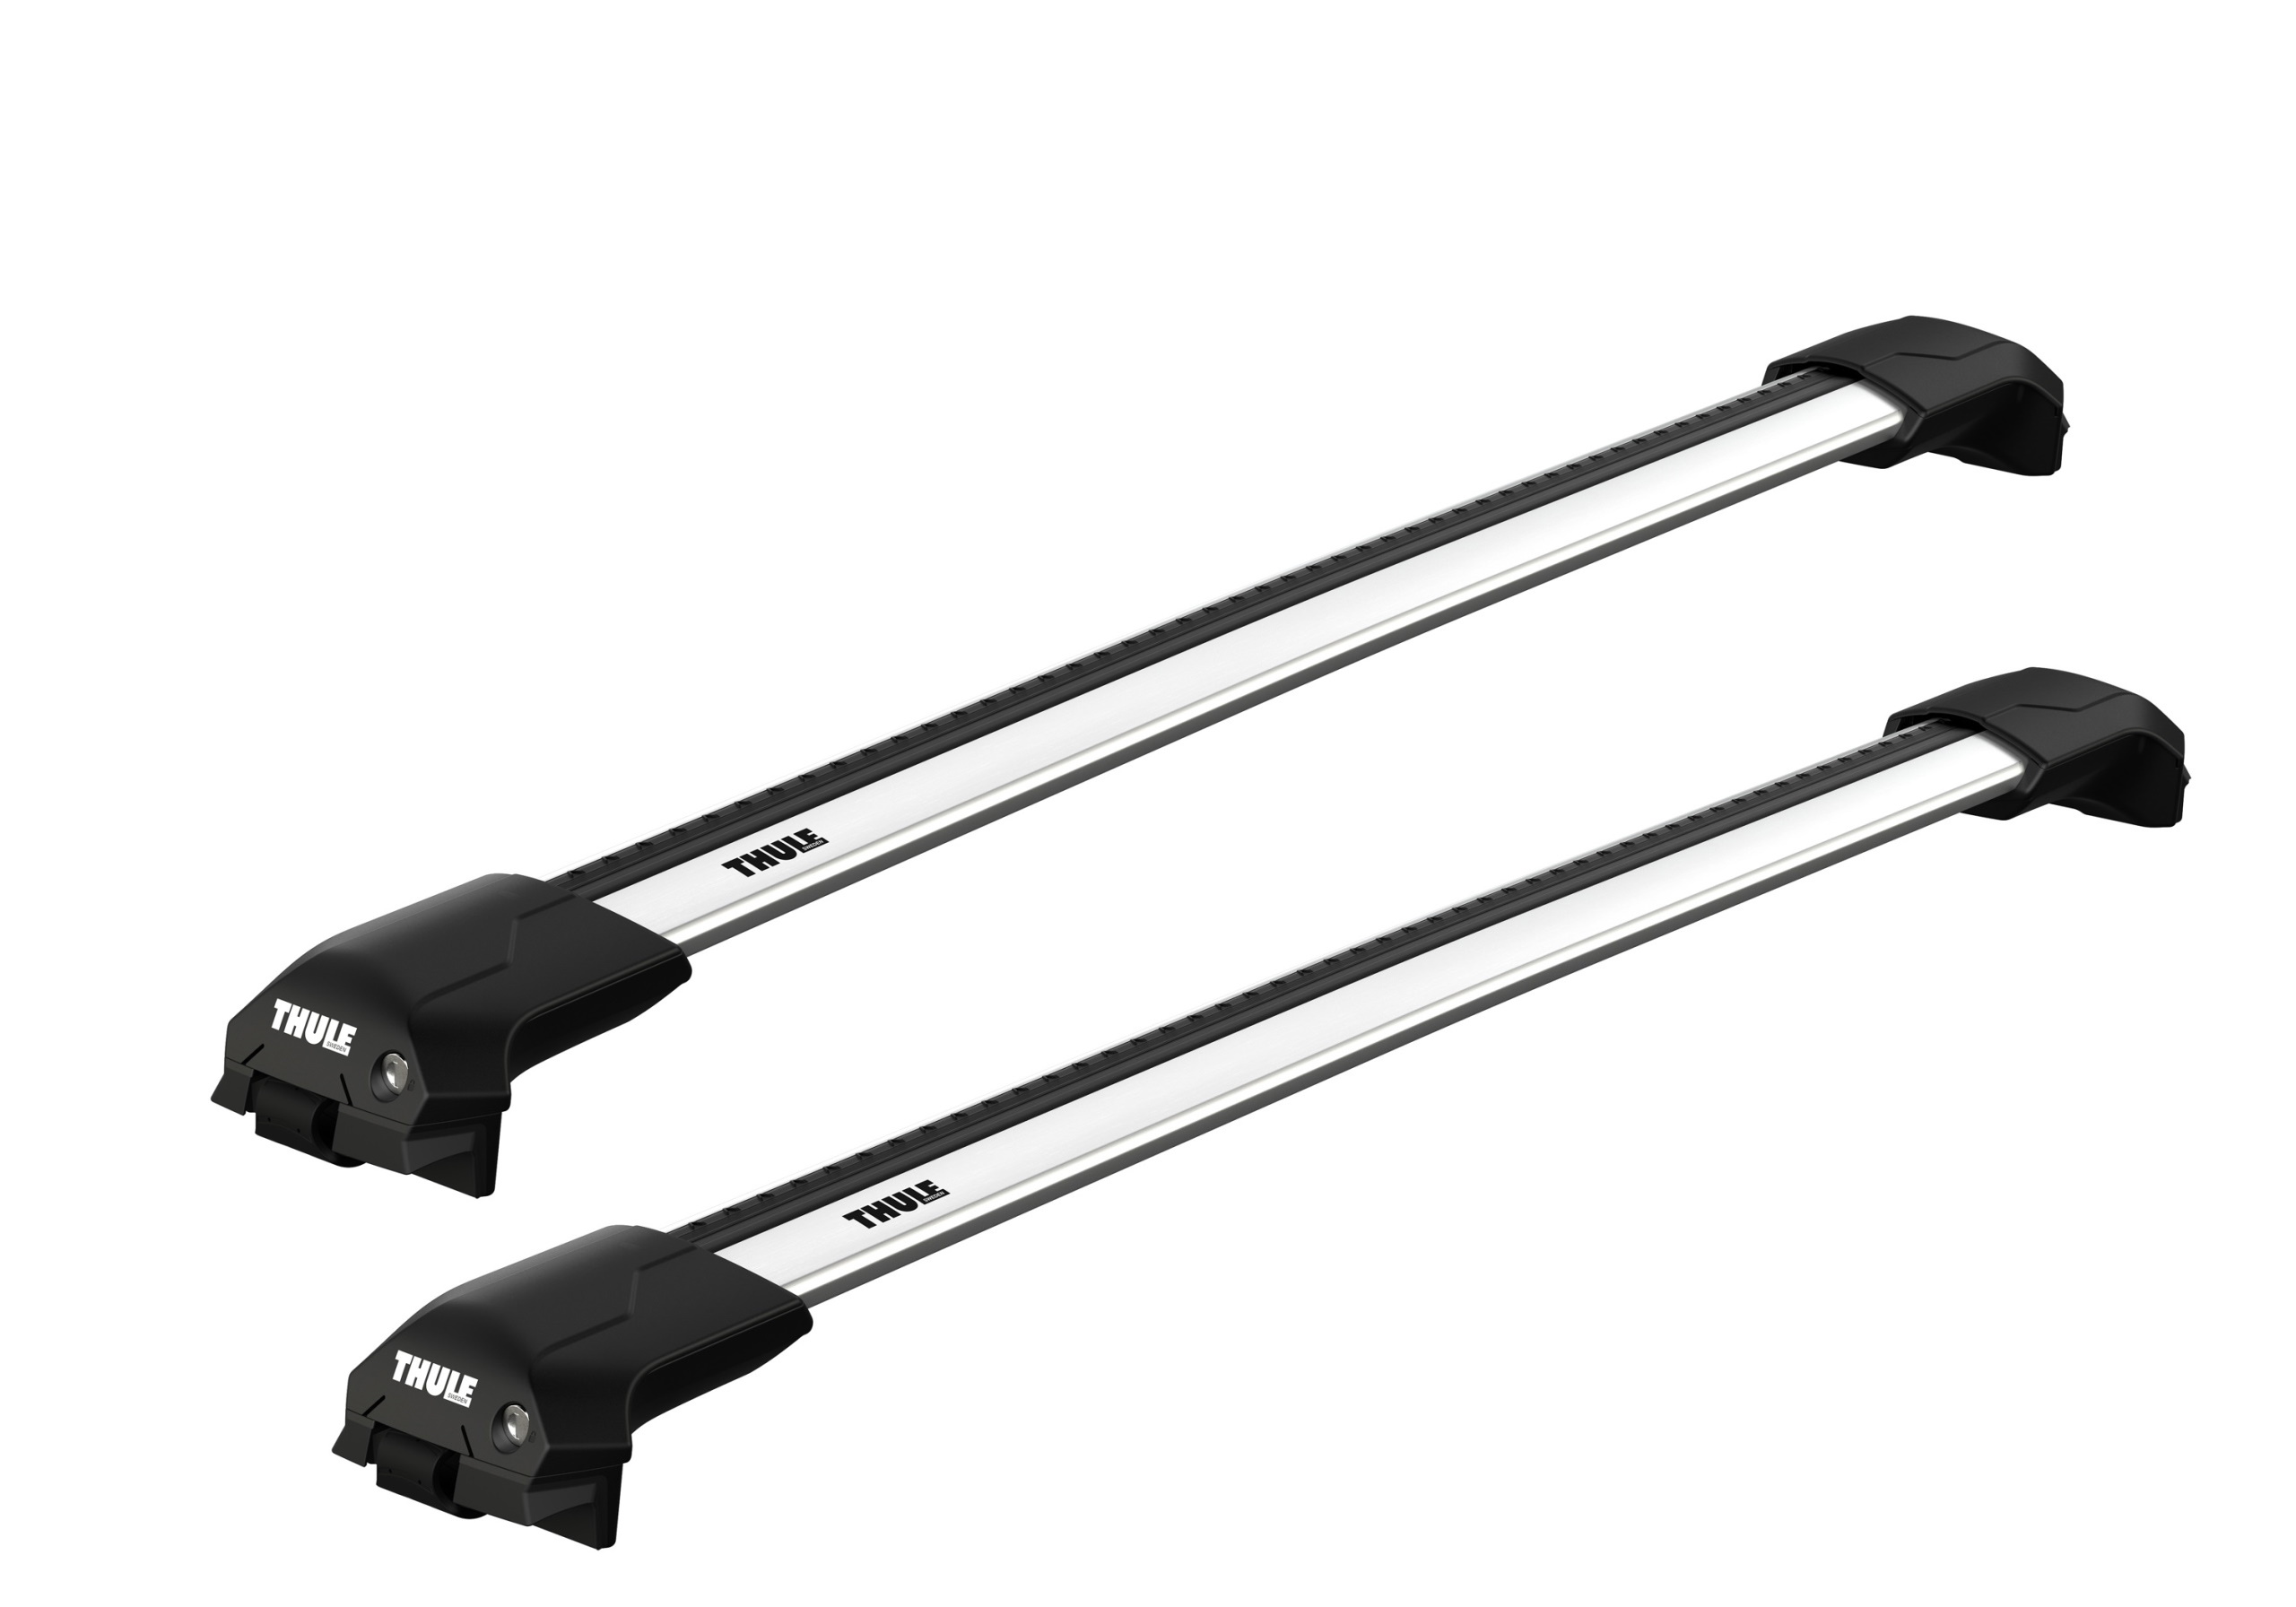 Ford Kuga (2008 to 2013):Thule Edge silver WingBars package - 7204, 7213, 7213